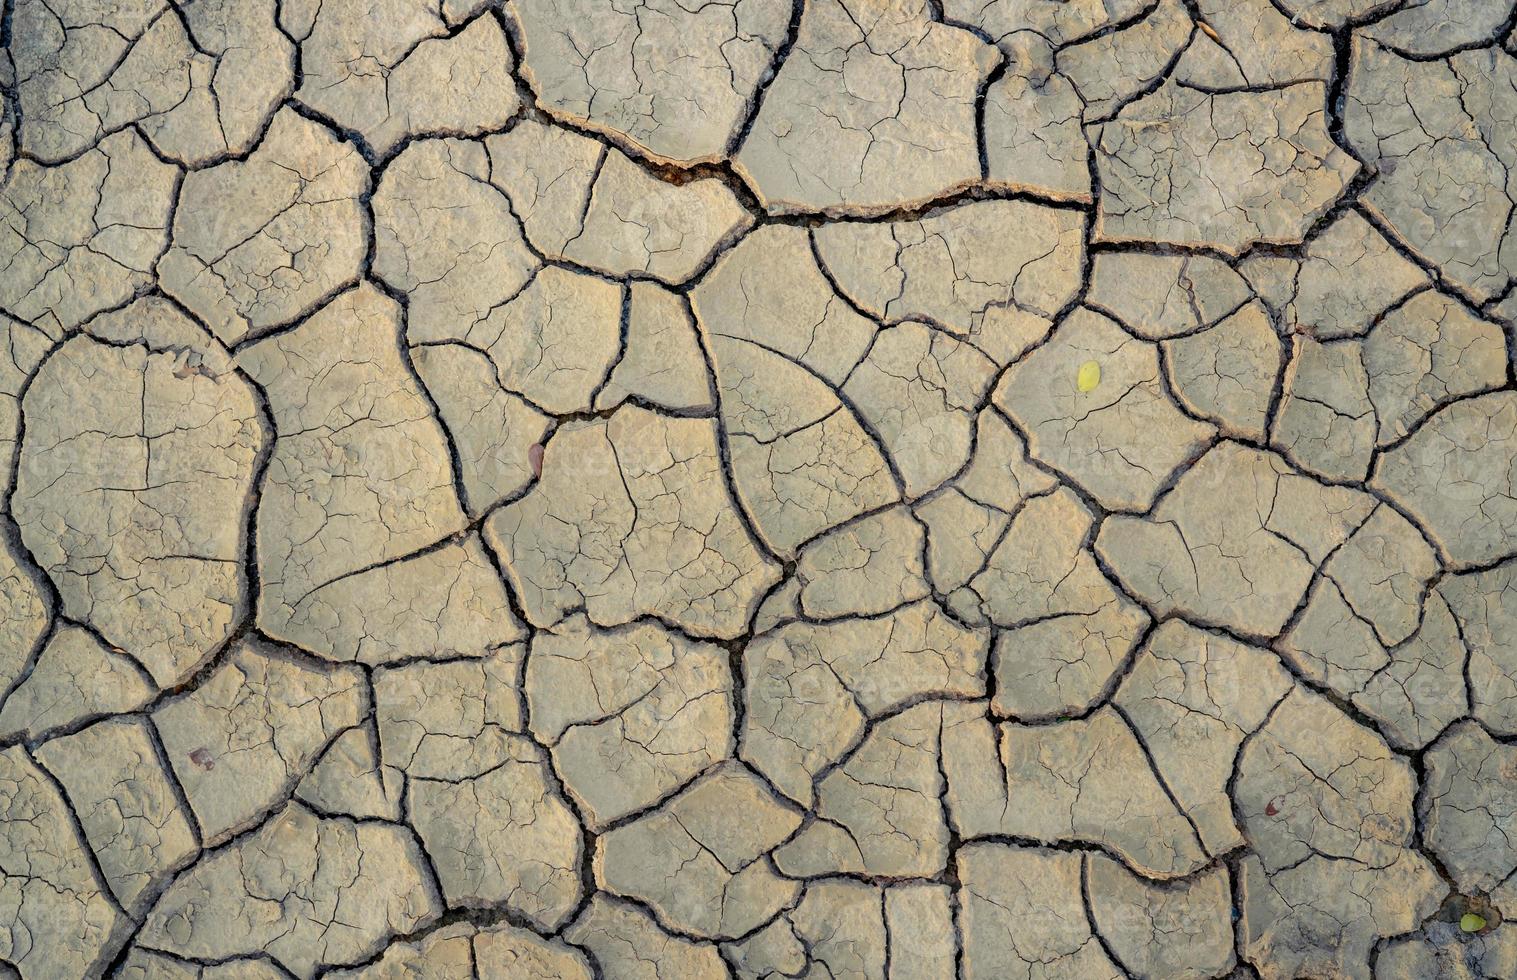 Climate change and drought land. Water crisis. Arid climate. Crack soil. Global warming. Environment problem. Nature disaster. Dry soil texture background. Dry and cracked skin need moisture concept. photo